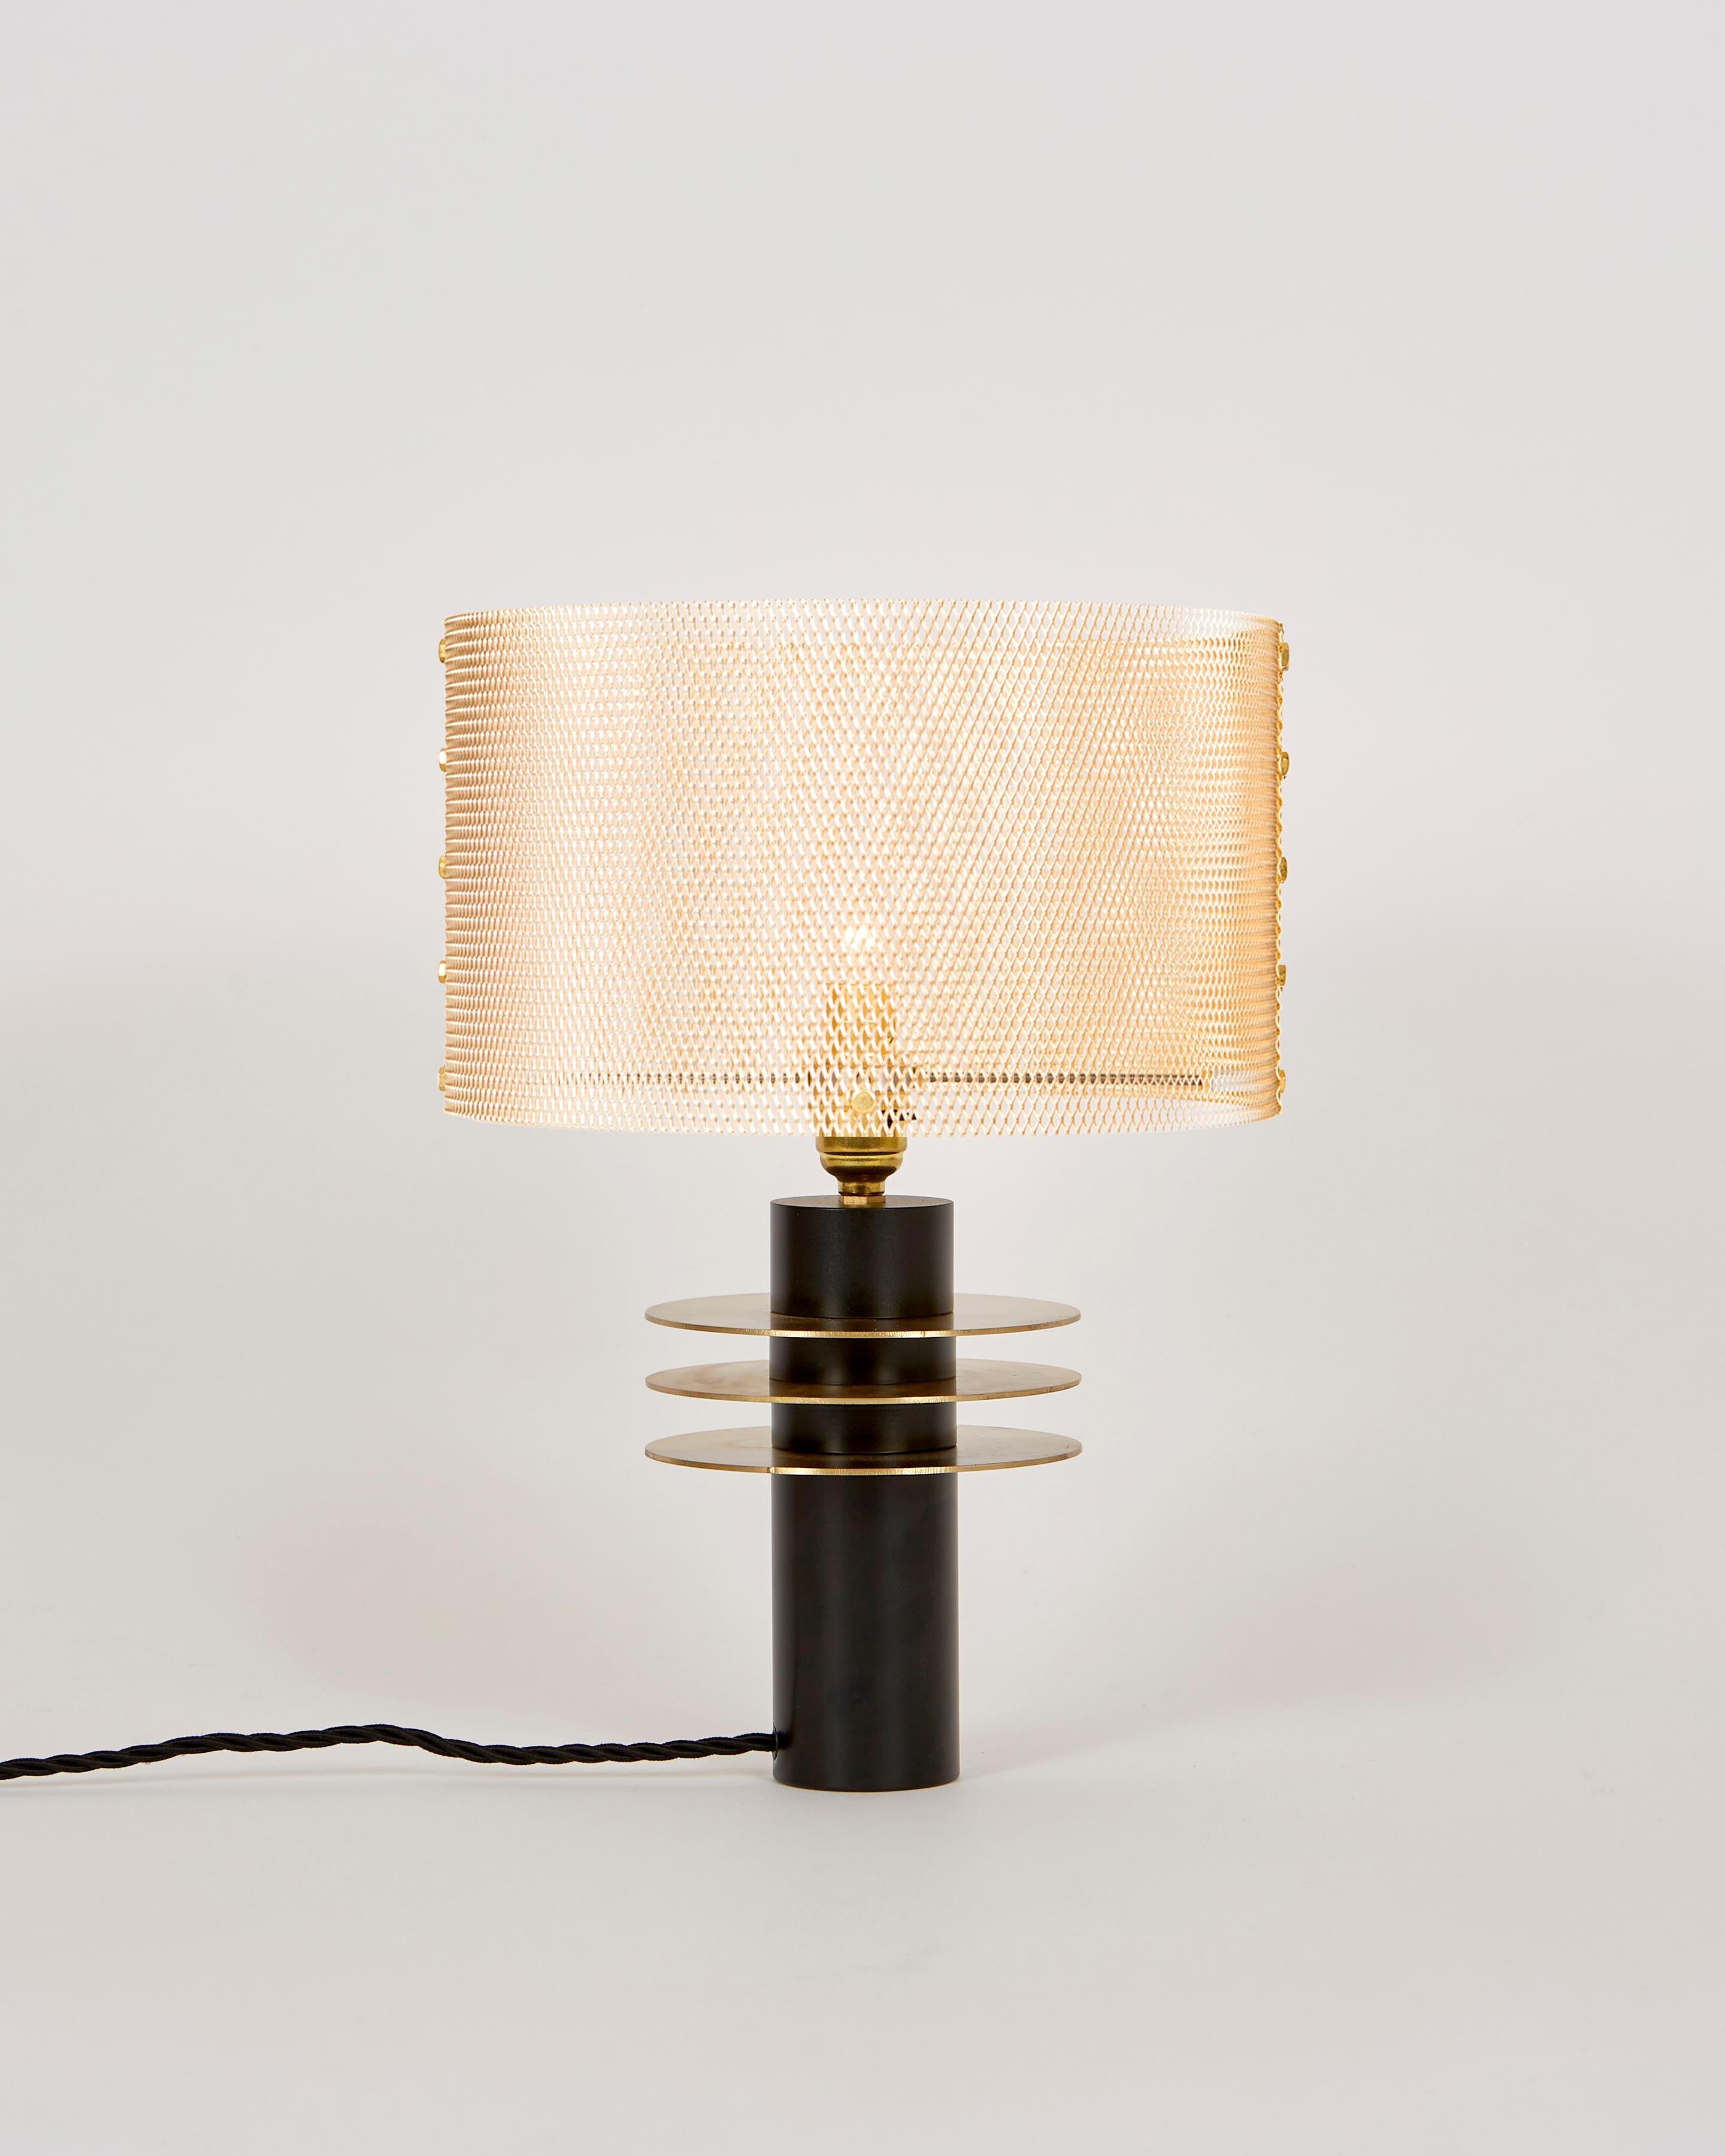 Expanded metal has become a recognizable trademark of Studio Marine Breynaert. The shades form a regular lace. Light lives through the mesh, it is not frozen, it moves and draws changing shadows.
These lamps are suitable for lighting a living room,